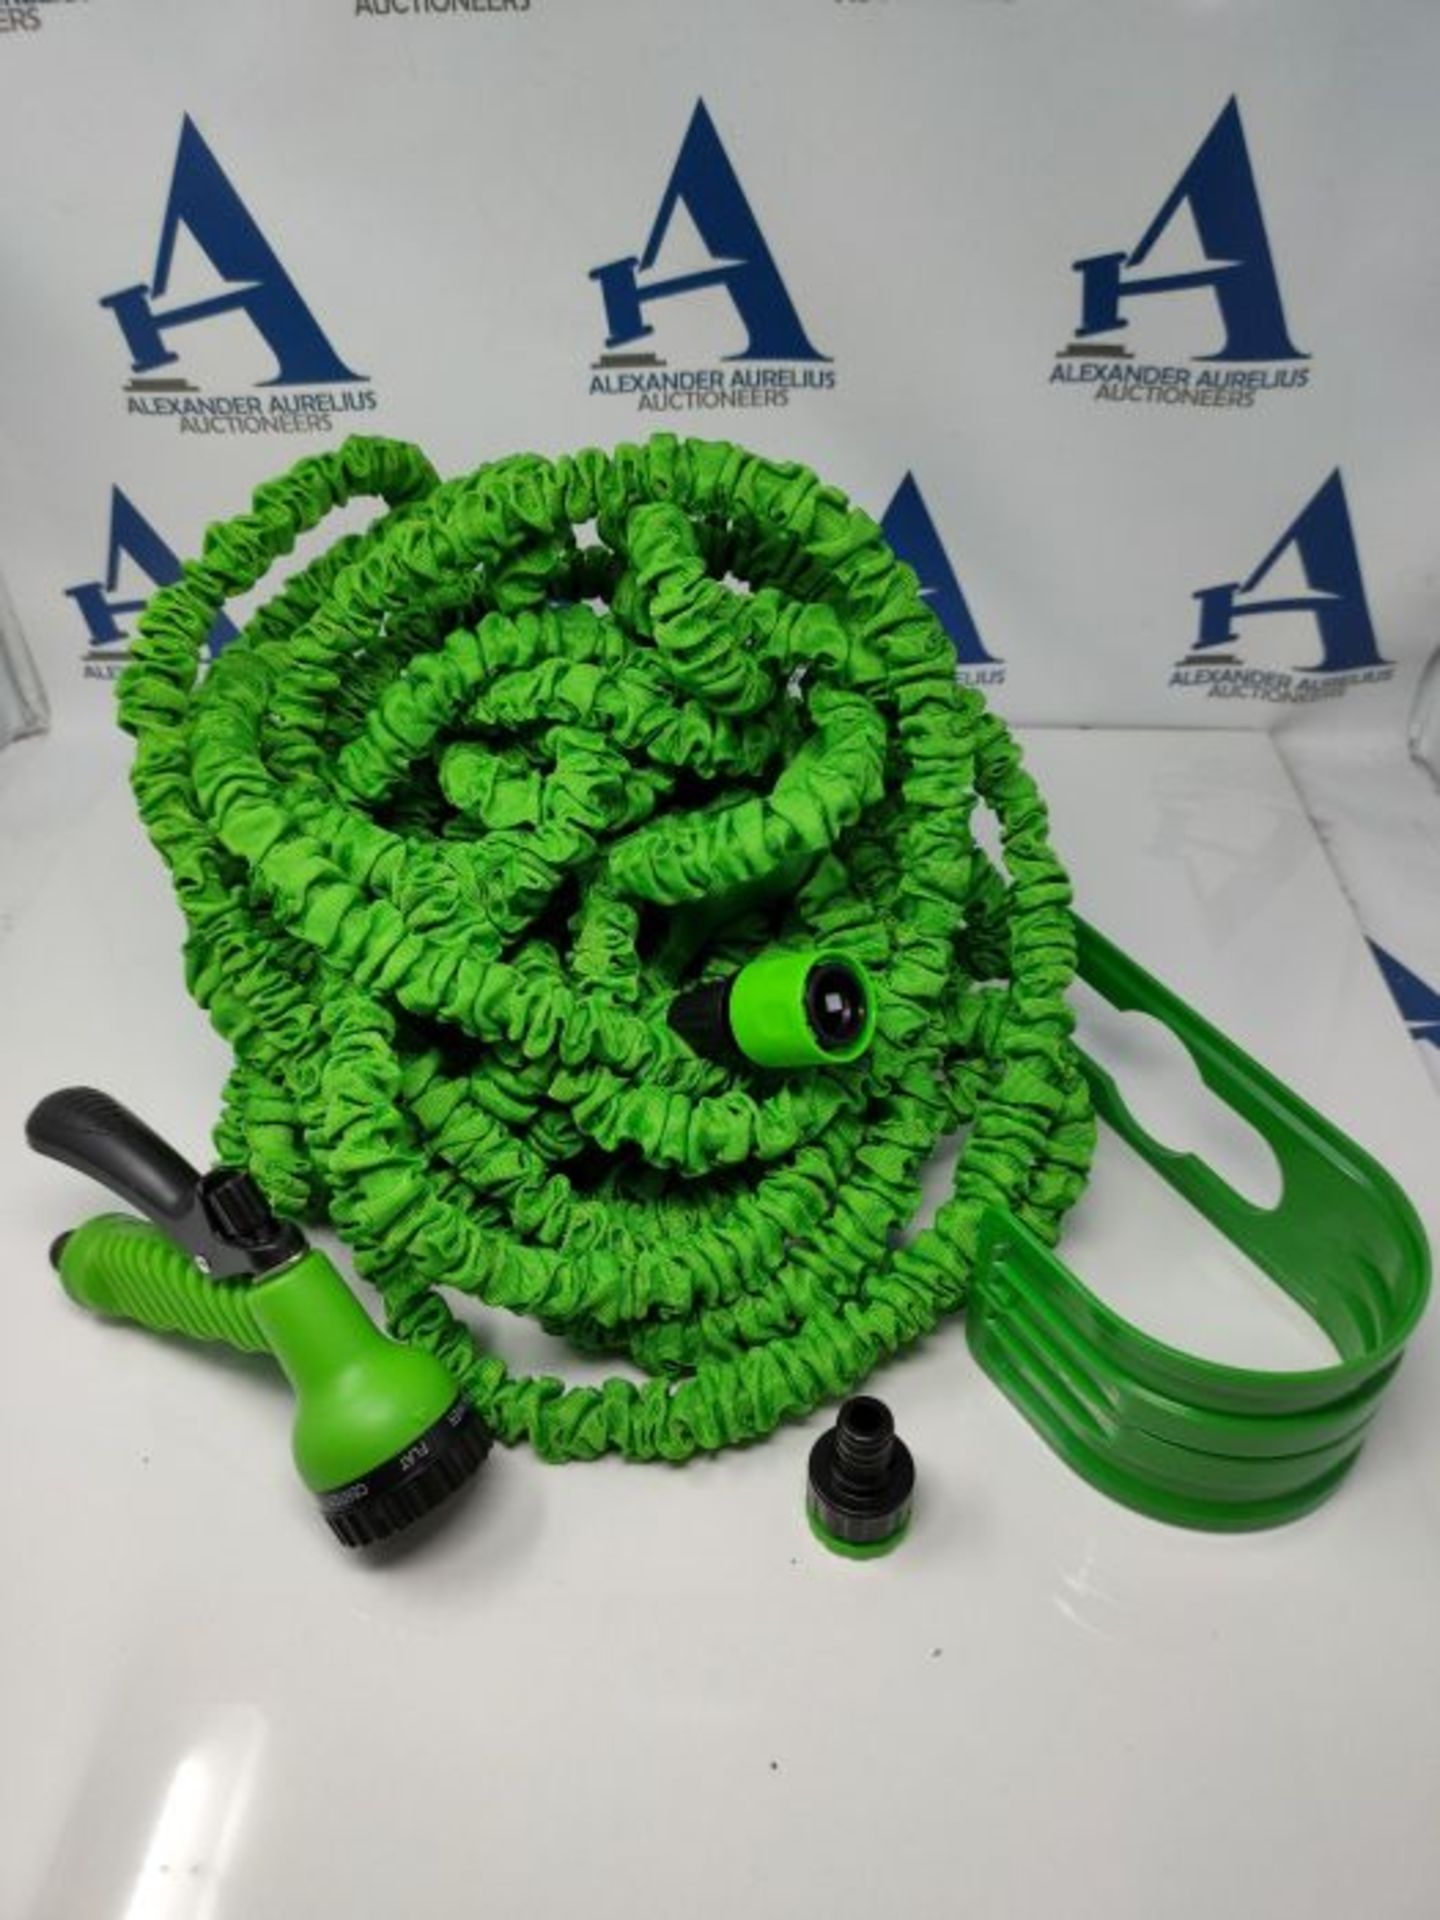 Flexi Hose 150 Foot Expandable Garden Hose with 7 Function Spray Nozzle - Durable Bras - Image 3 of 3